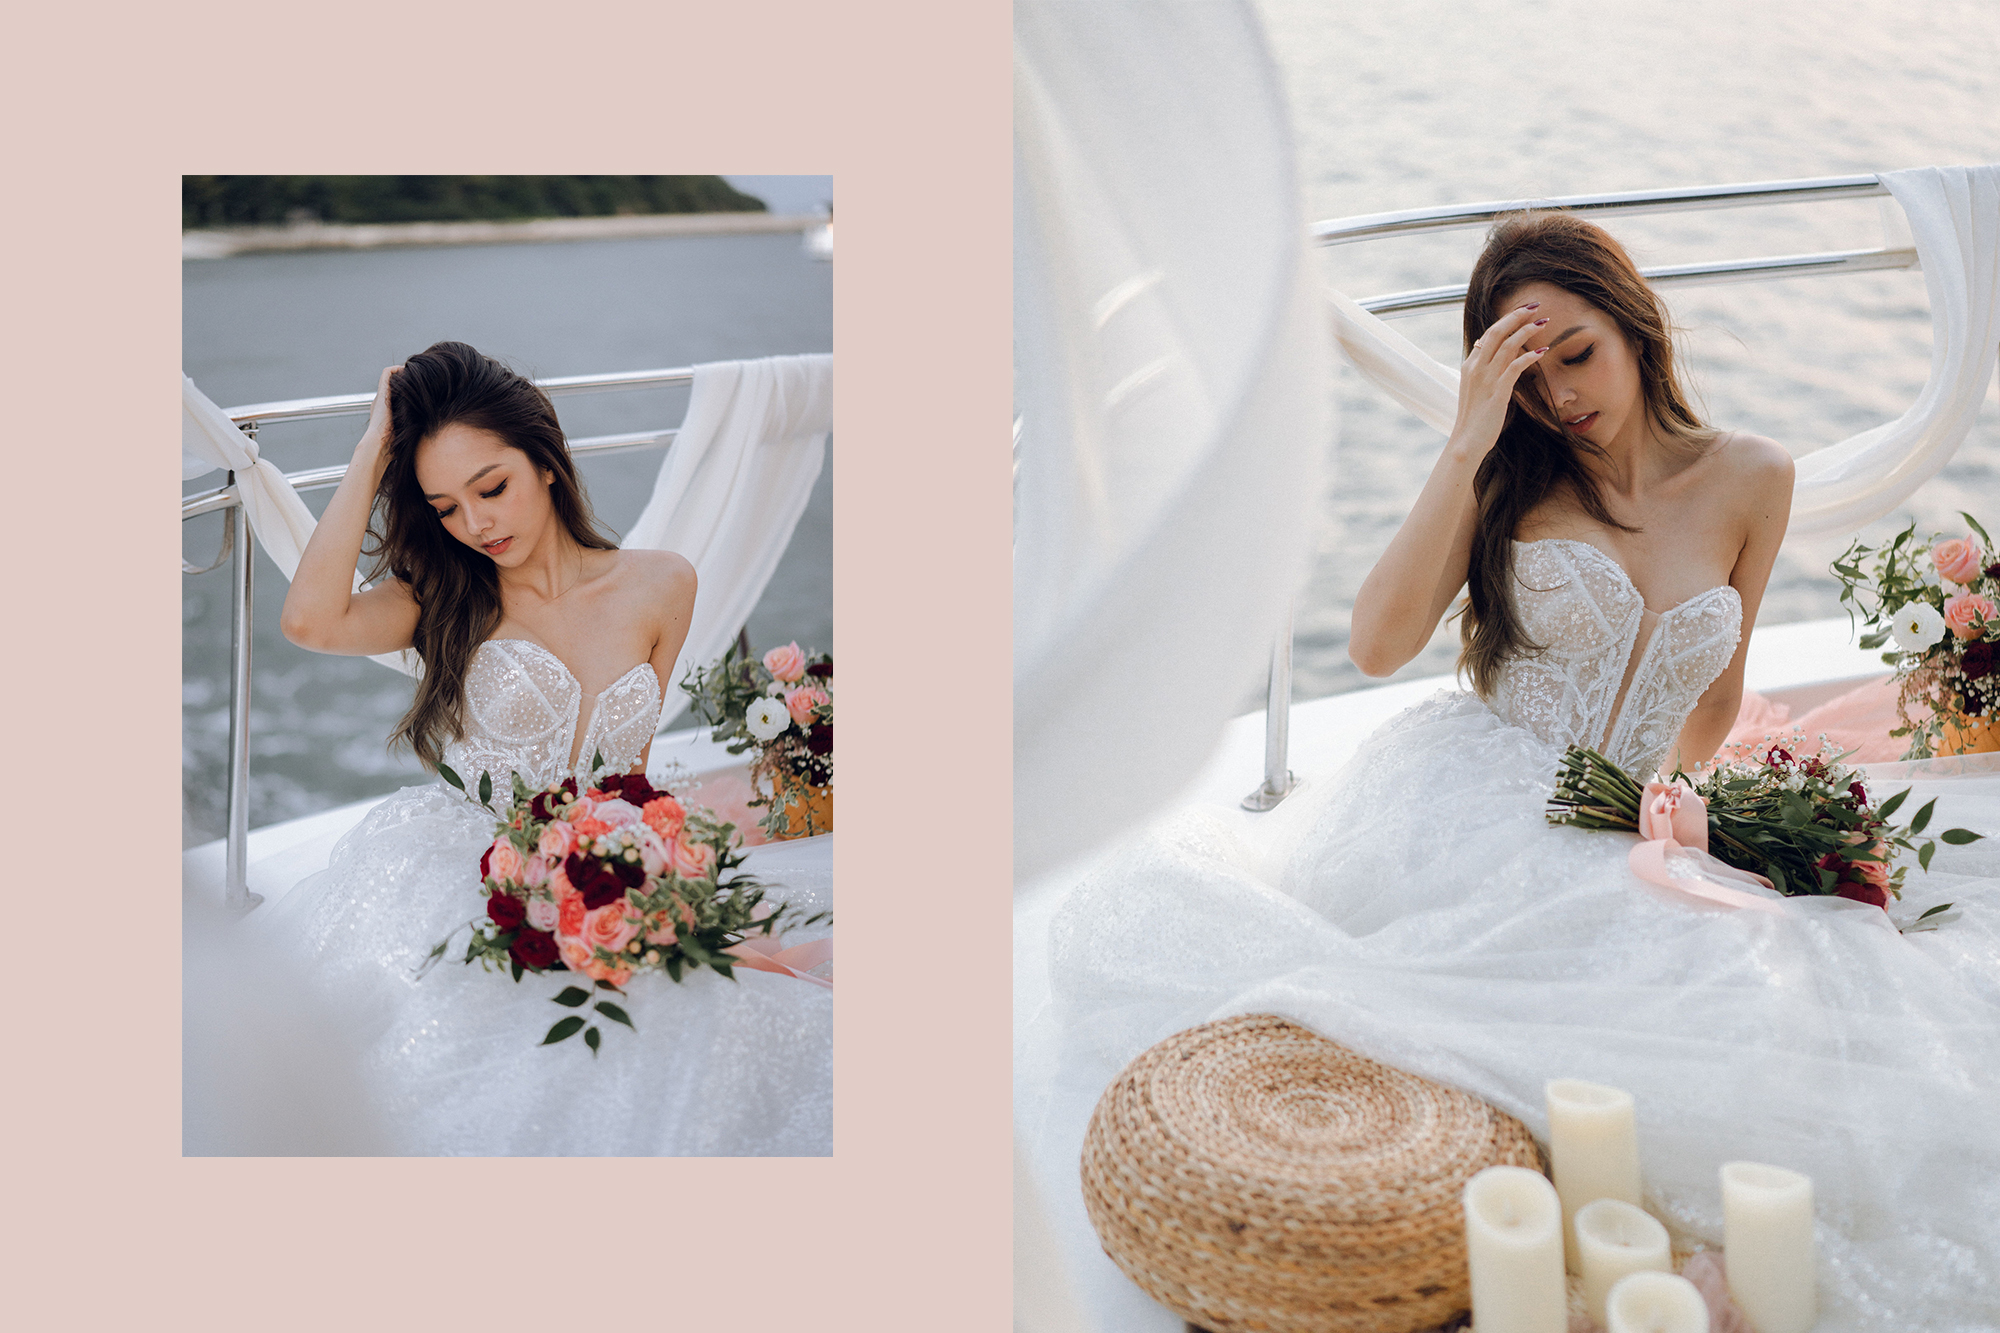 Sunset Prewedding Photoshoot On A Yacht With Romantic Floral Styling by Samantha on OneThreeOneFour 25